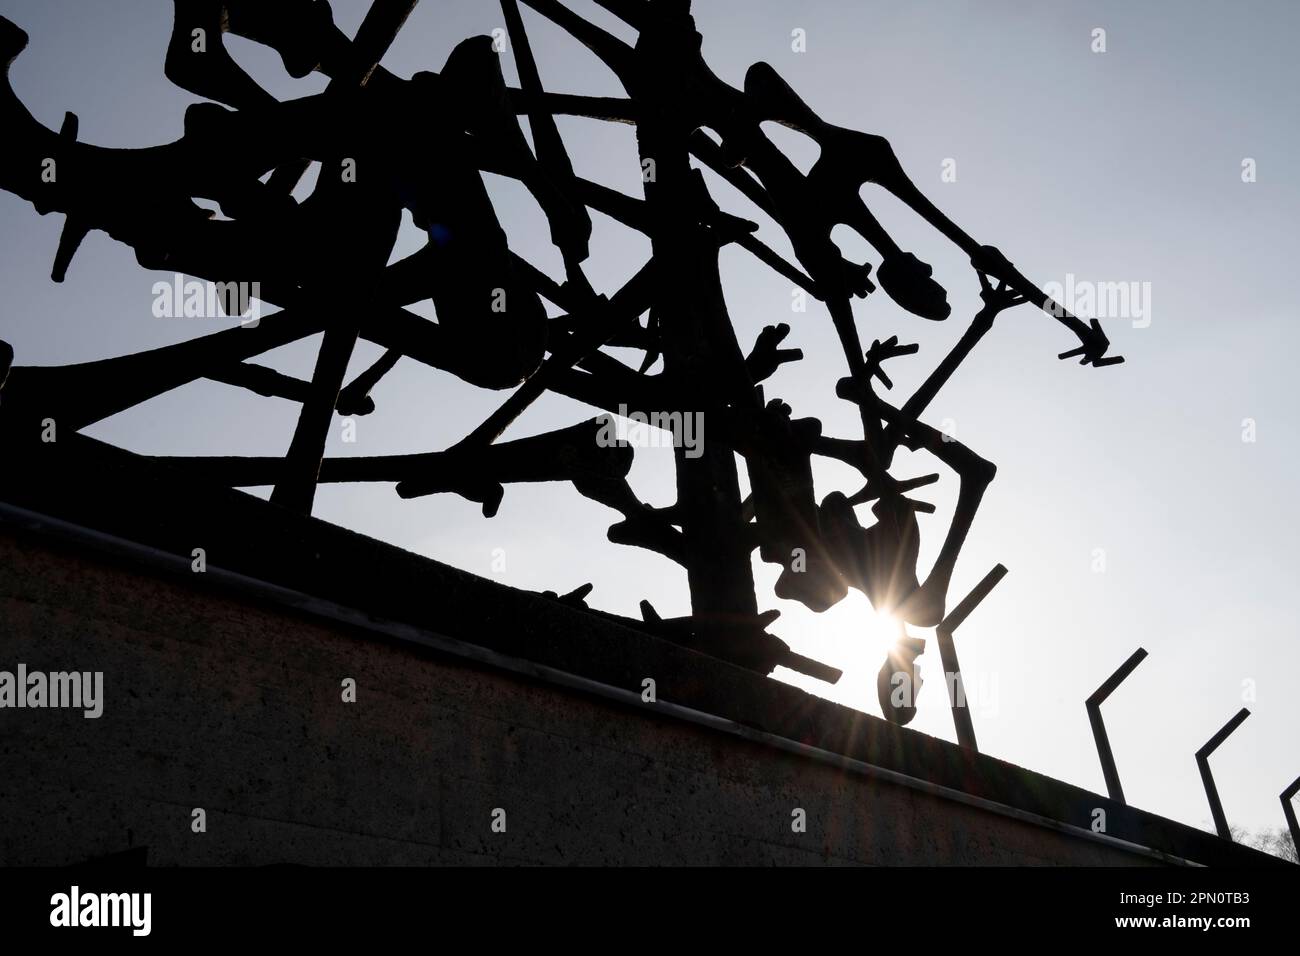 Memorial Sculpure at Dachau memorializing the Holocaust victims, done by the artist Nandor Glid who was a Holocaust survivor. Stock Photo